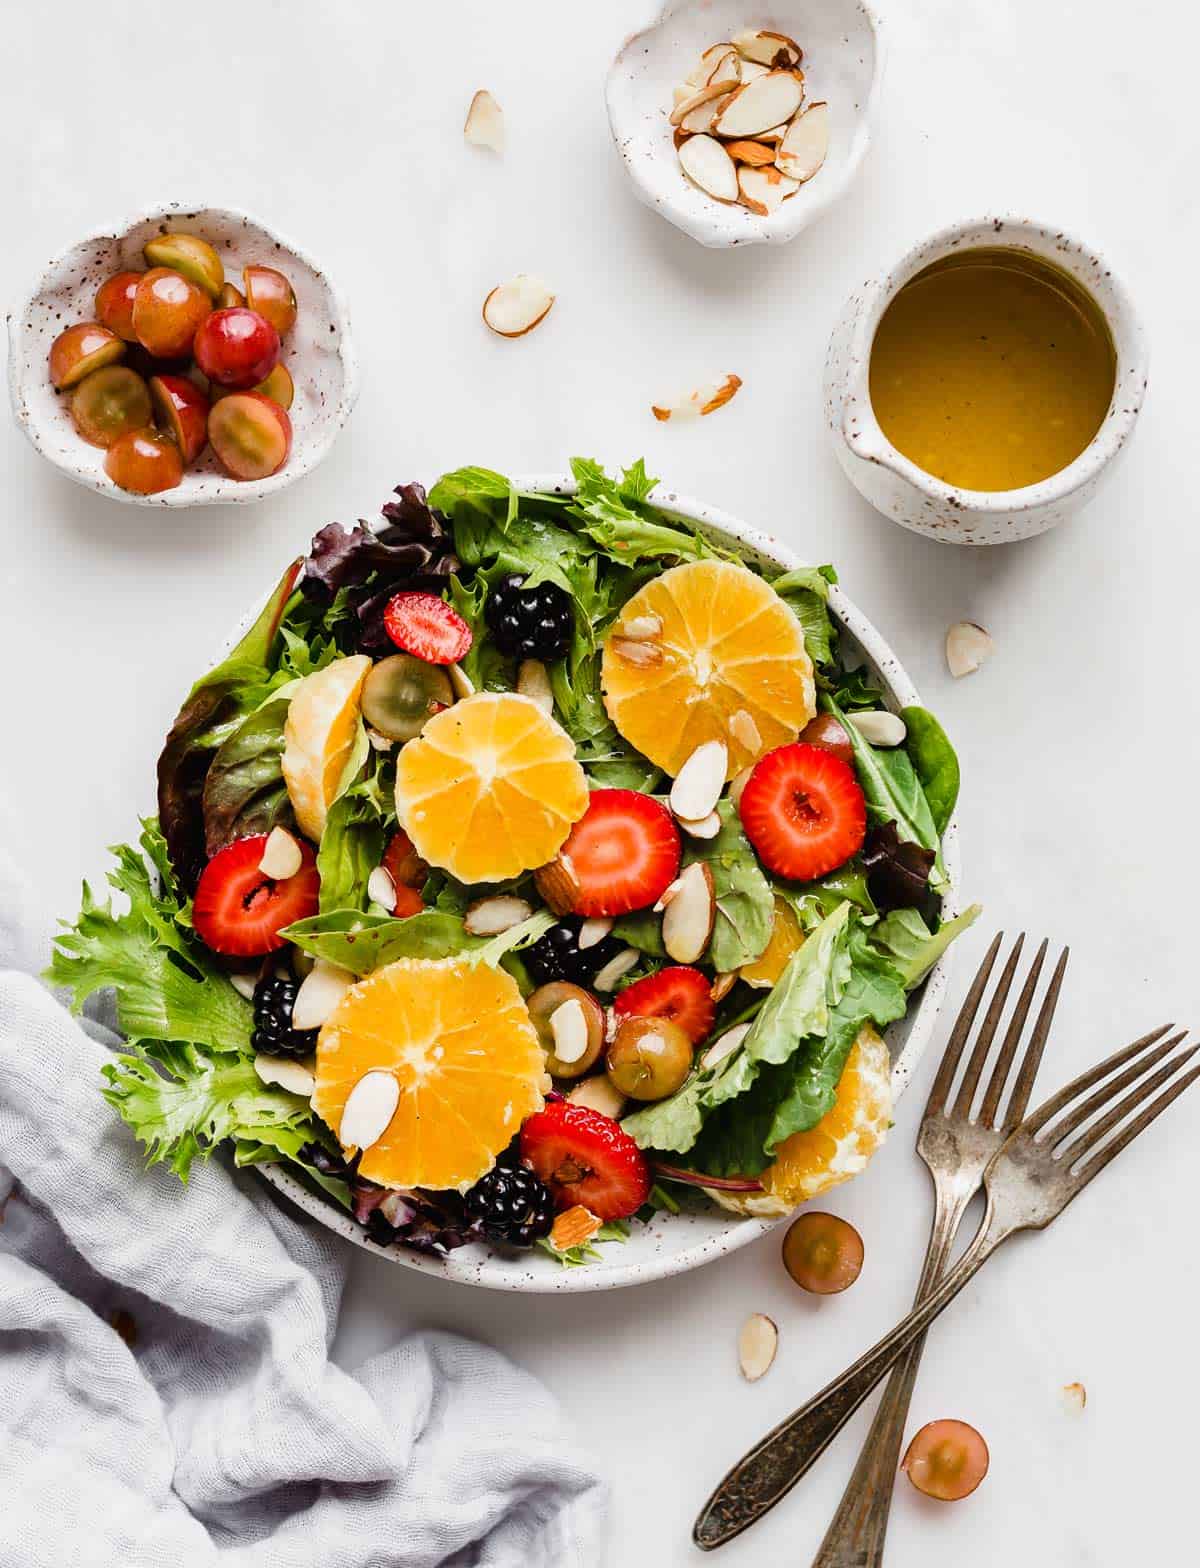 Citrus Salad on a white plate; mixed greens, strawberries, oranges, blackberries, grapes, and a citrus vinaigrette to the side.